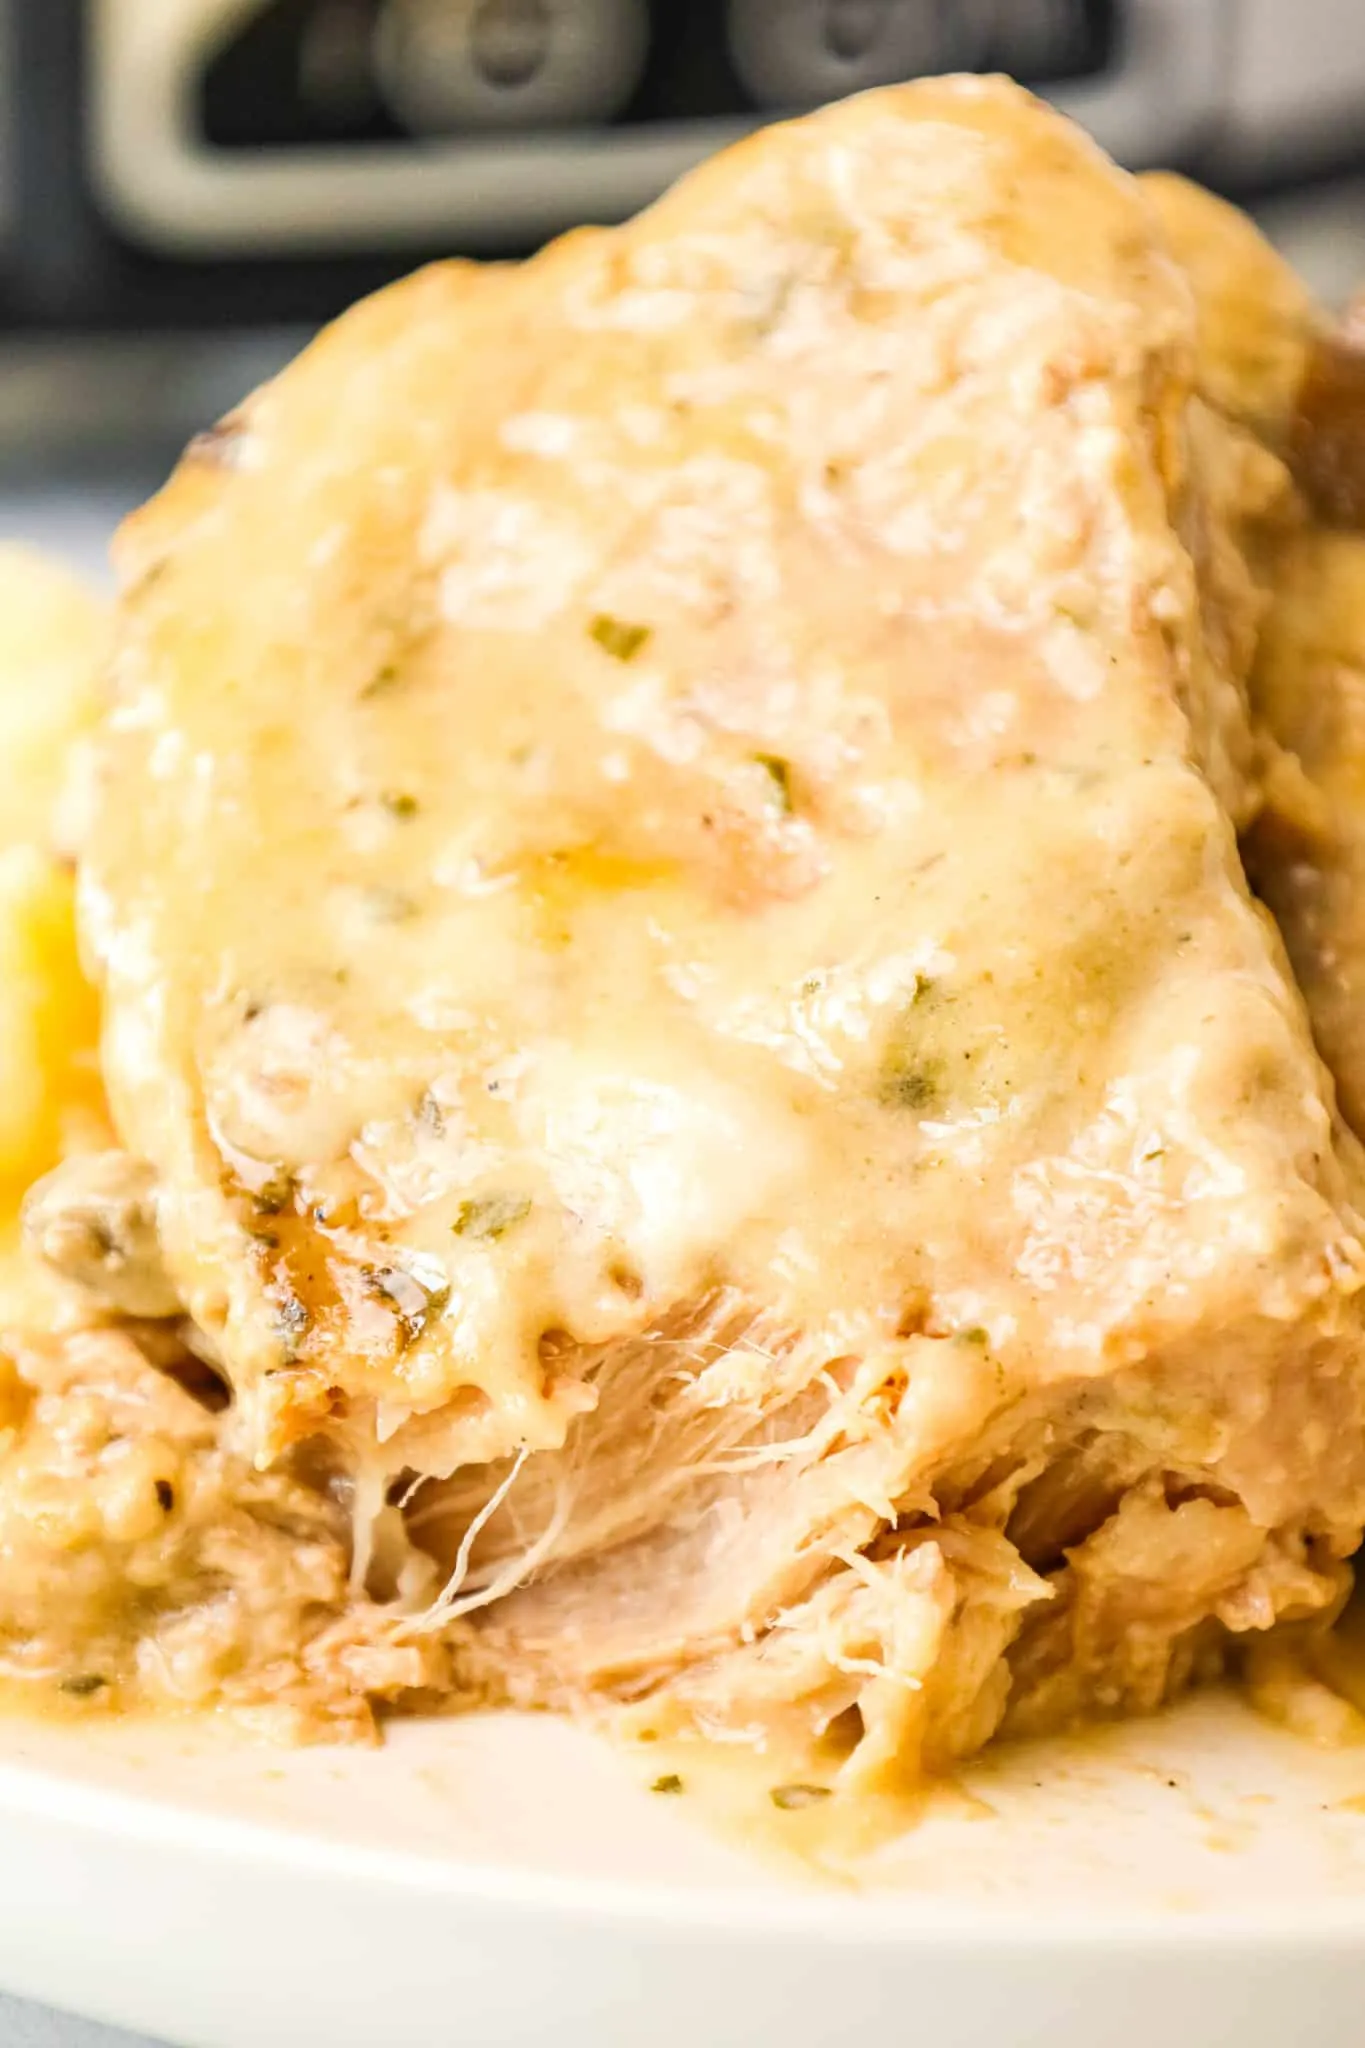  3 Ingredient Crock Pot Pork Chops are an easy slow cooker dinner recipe made with condensed cream of mushroom soup and ranch dressing mix.